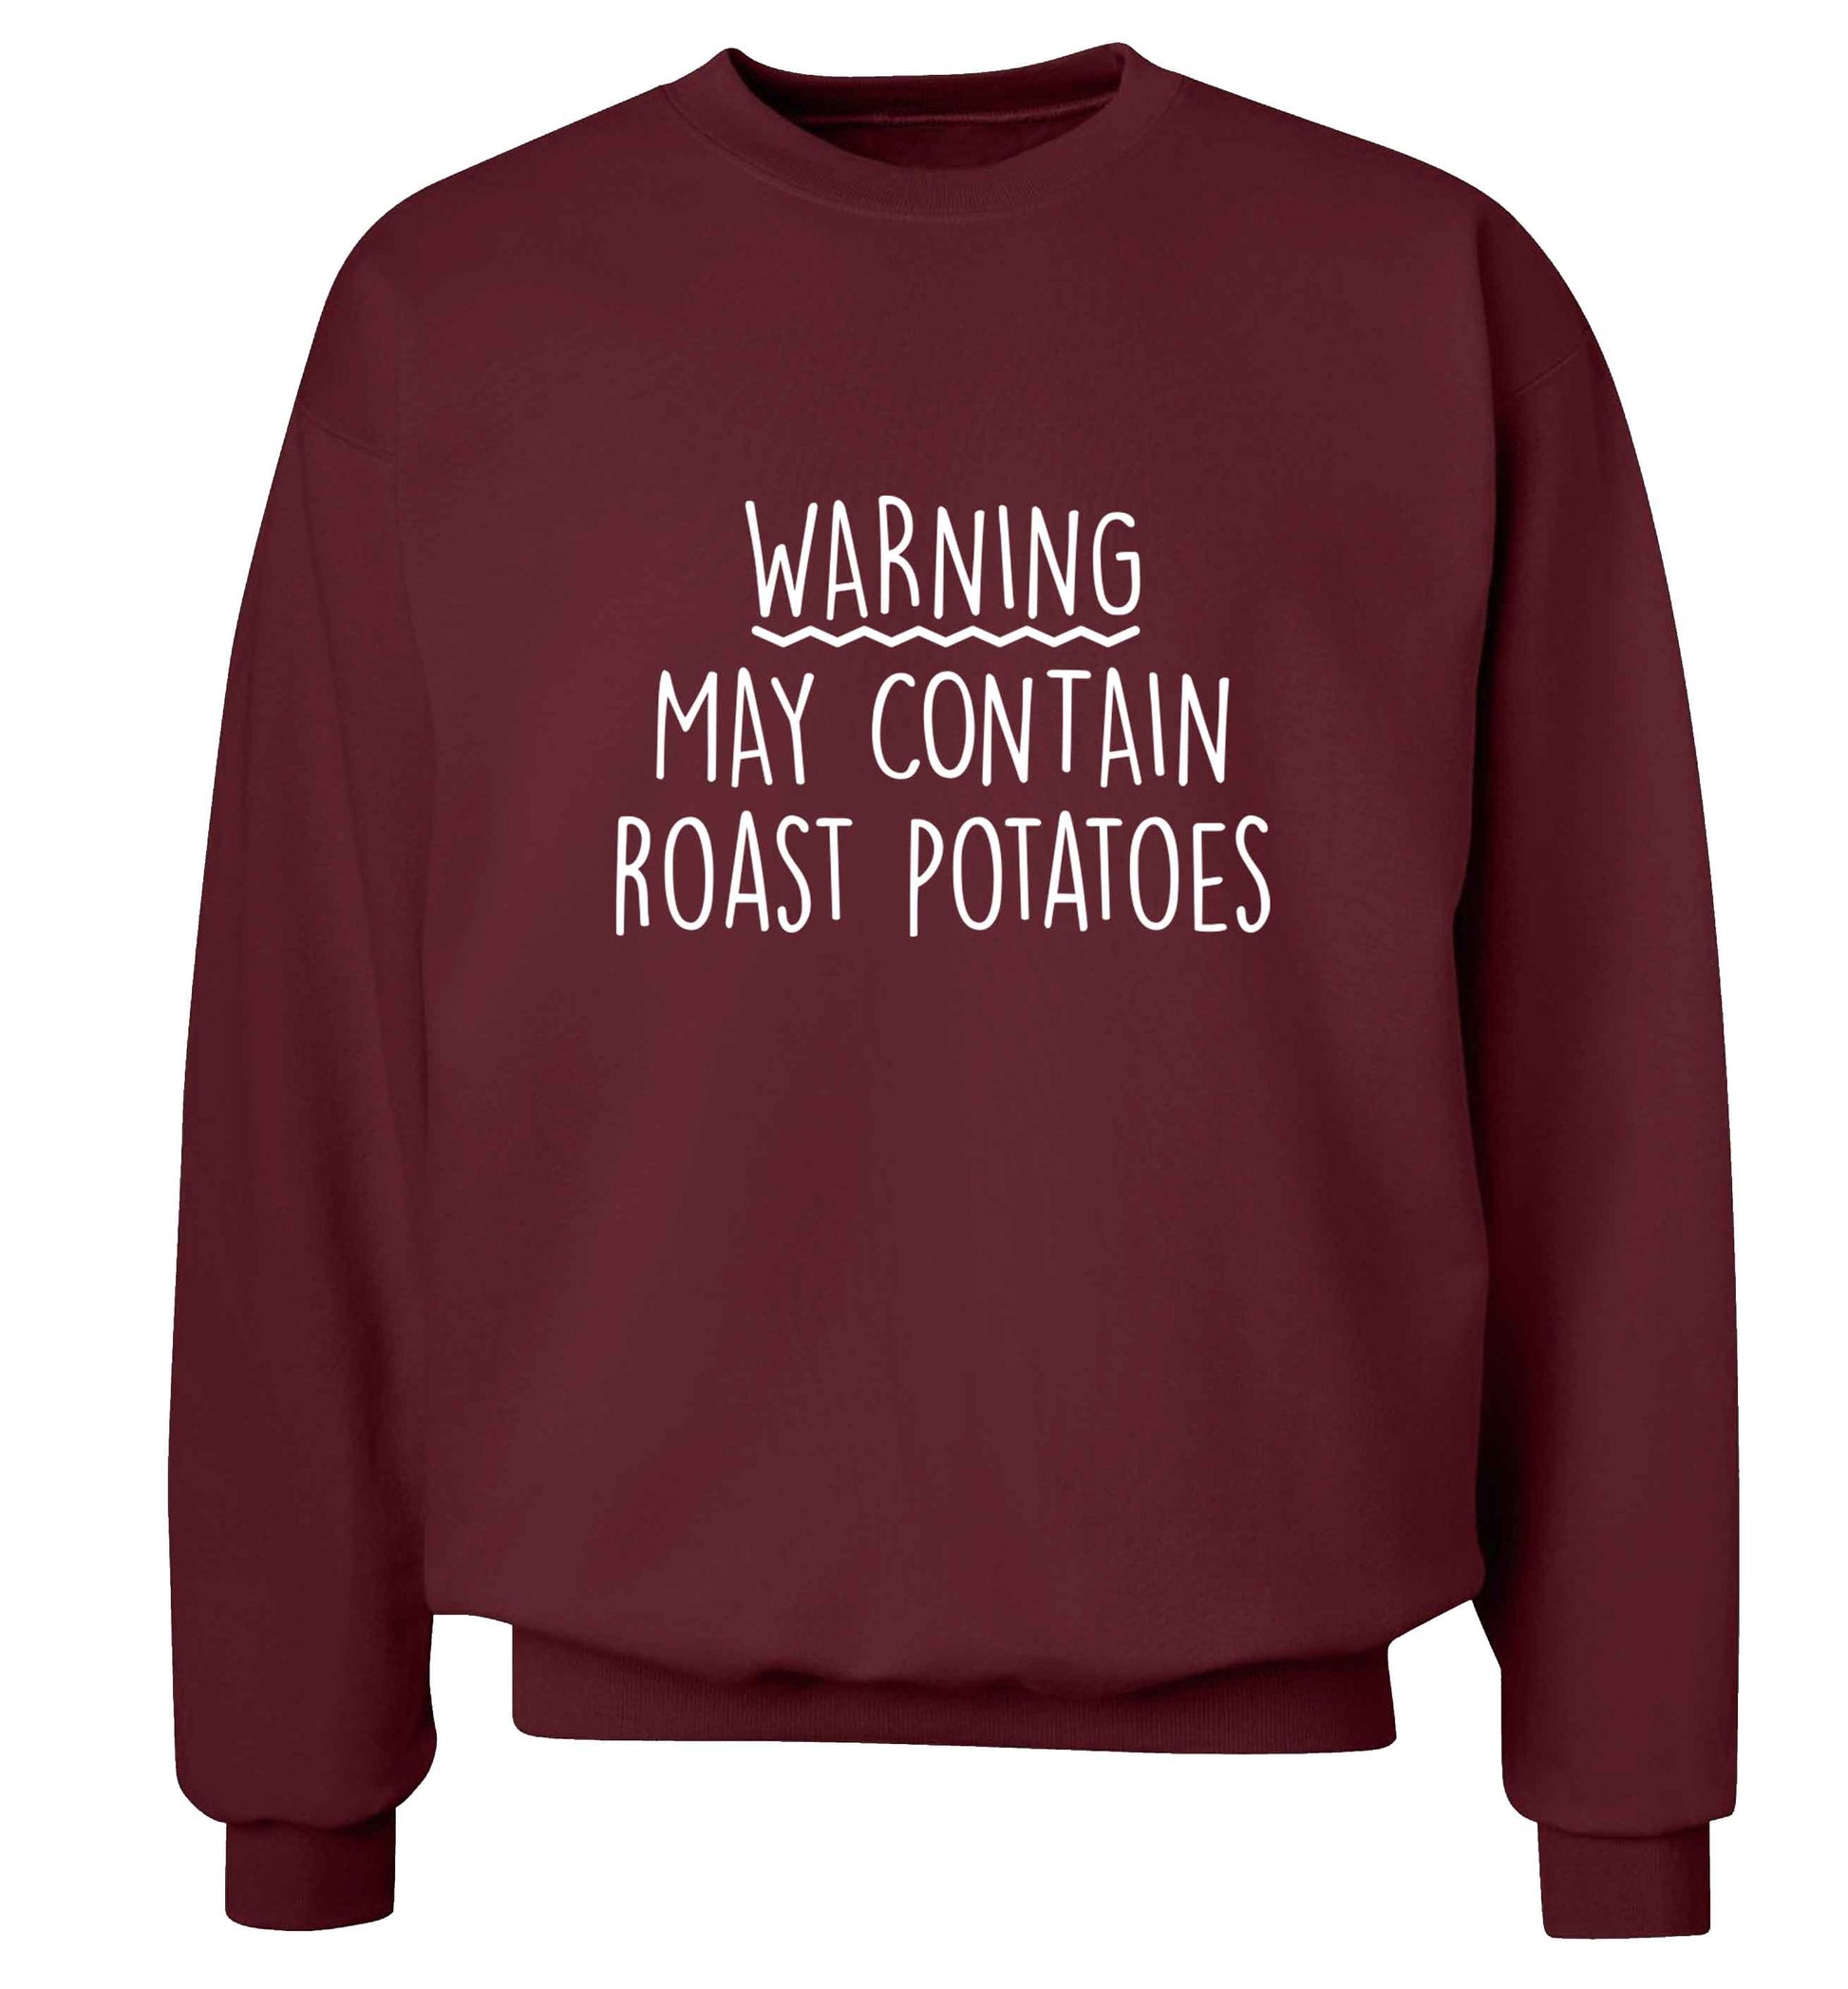 Warning may containg roast potatoes adult's unisex maroon sweater 2XL